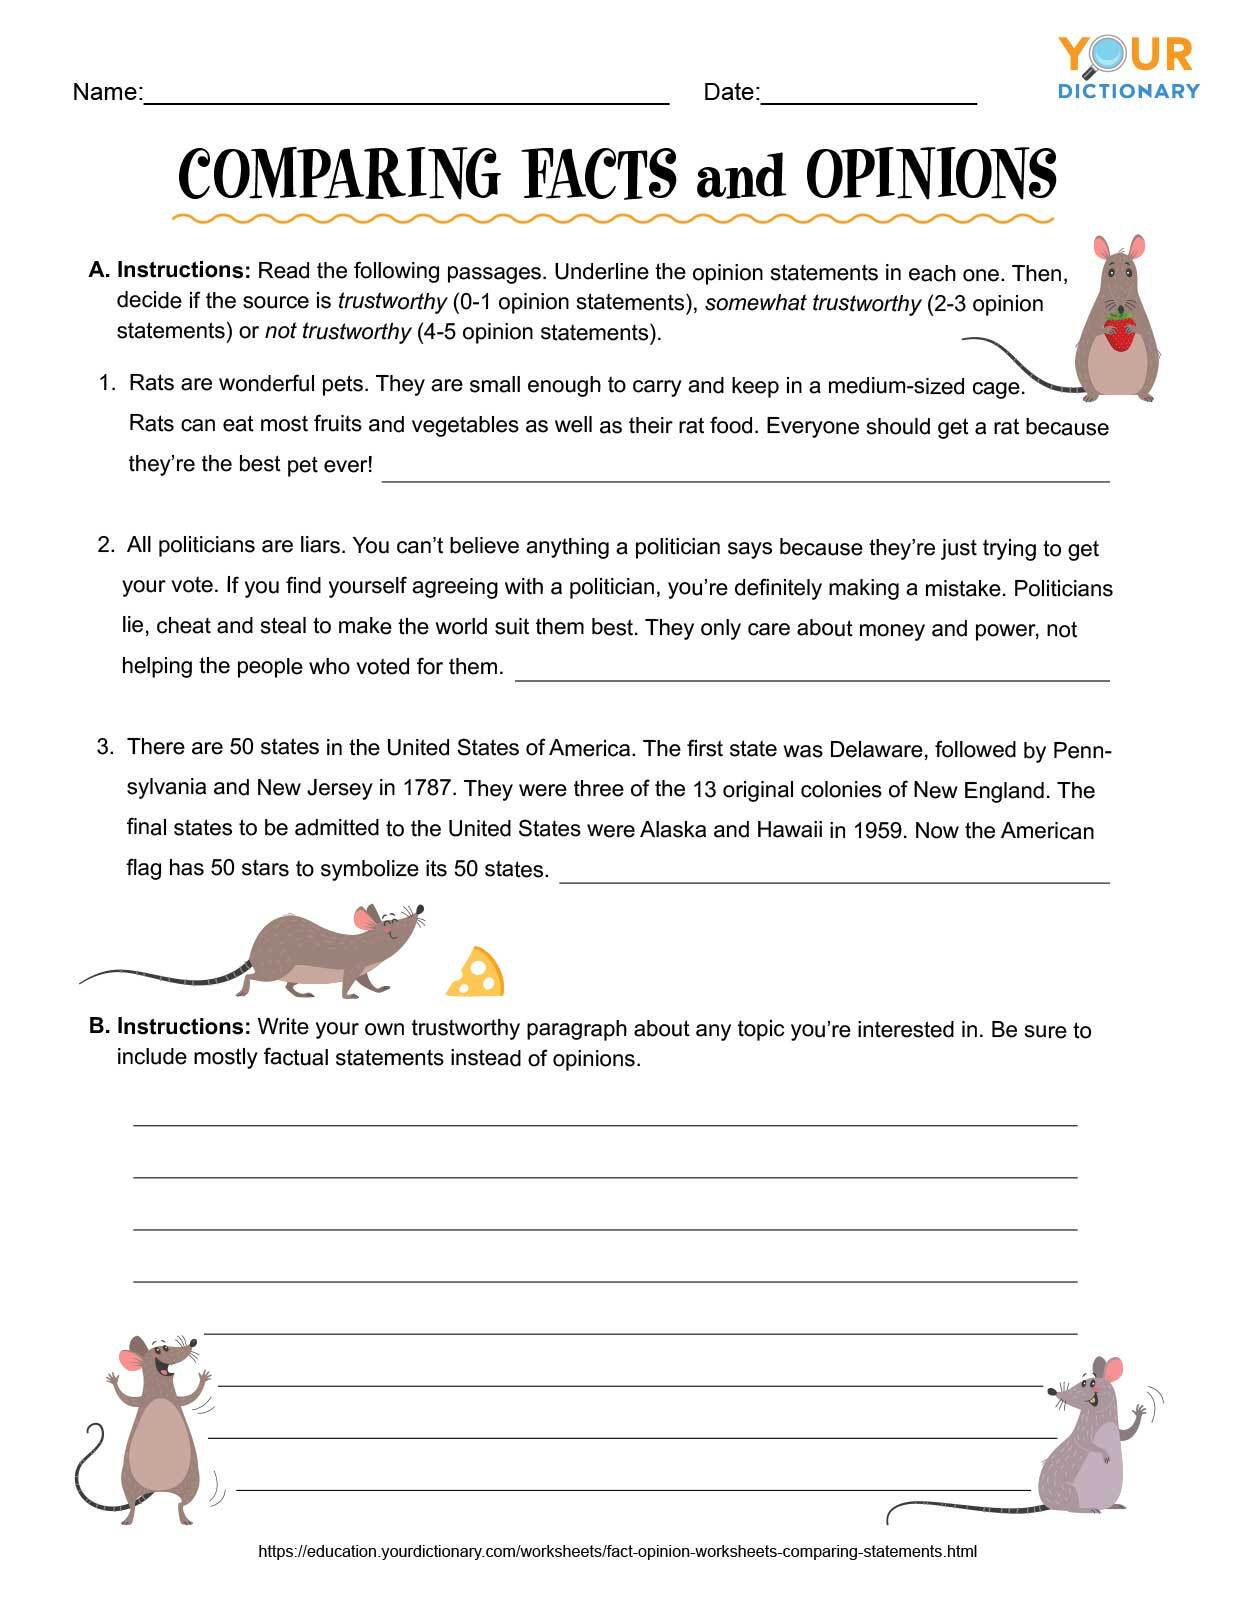 comparing facts and opinions worksheet